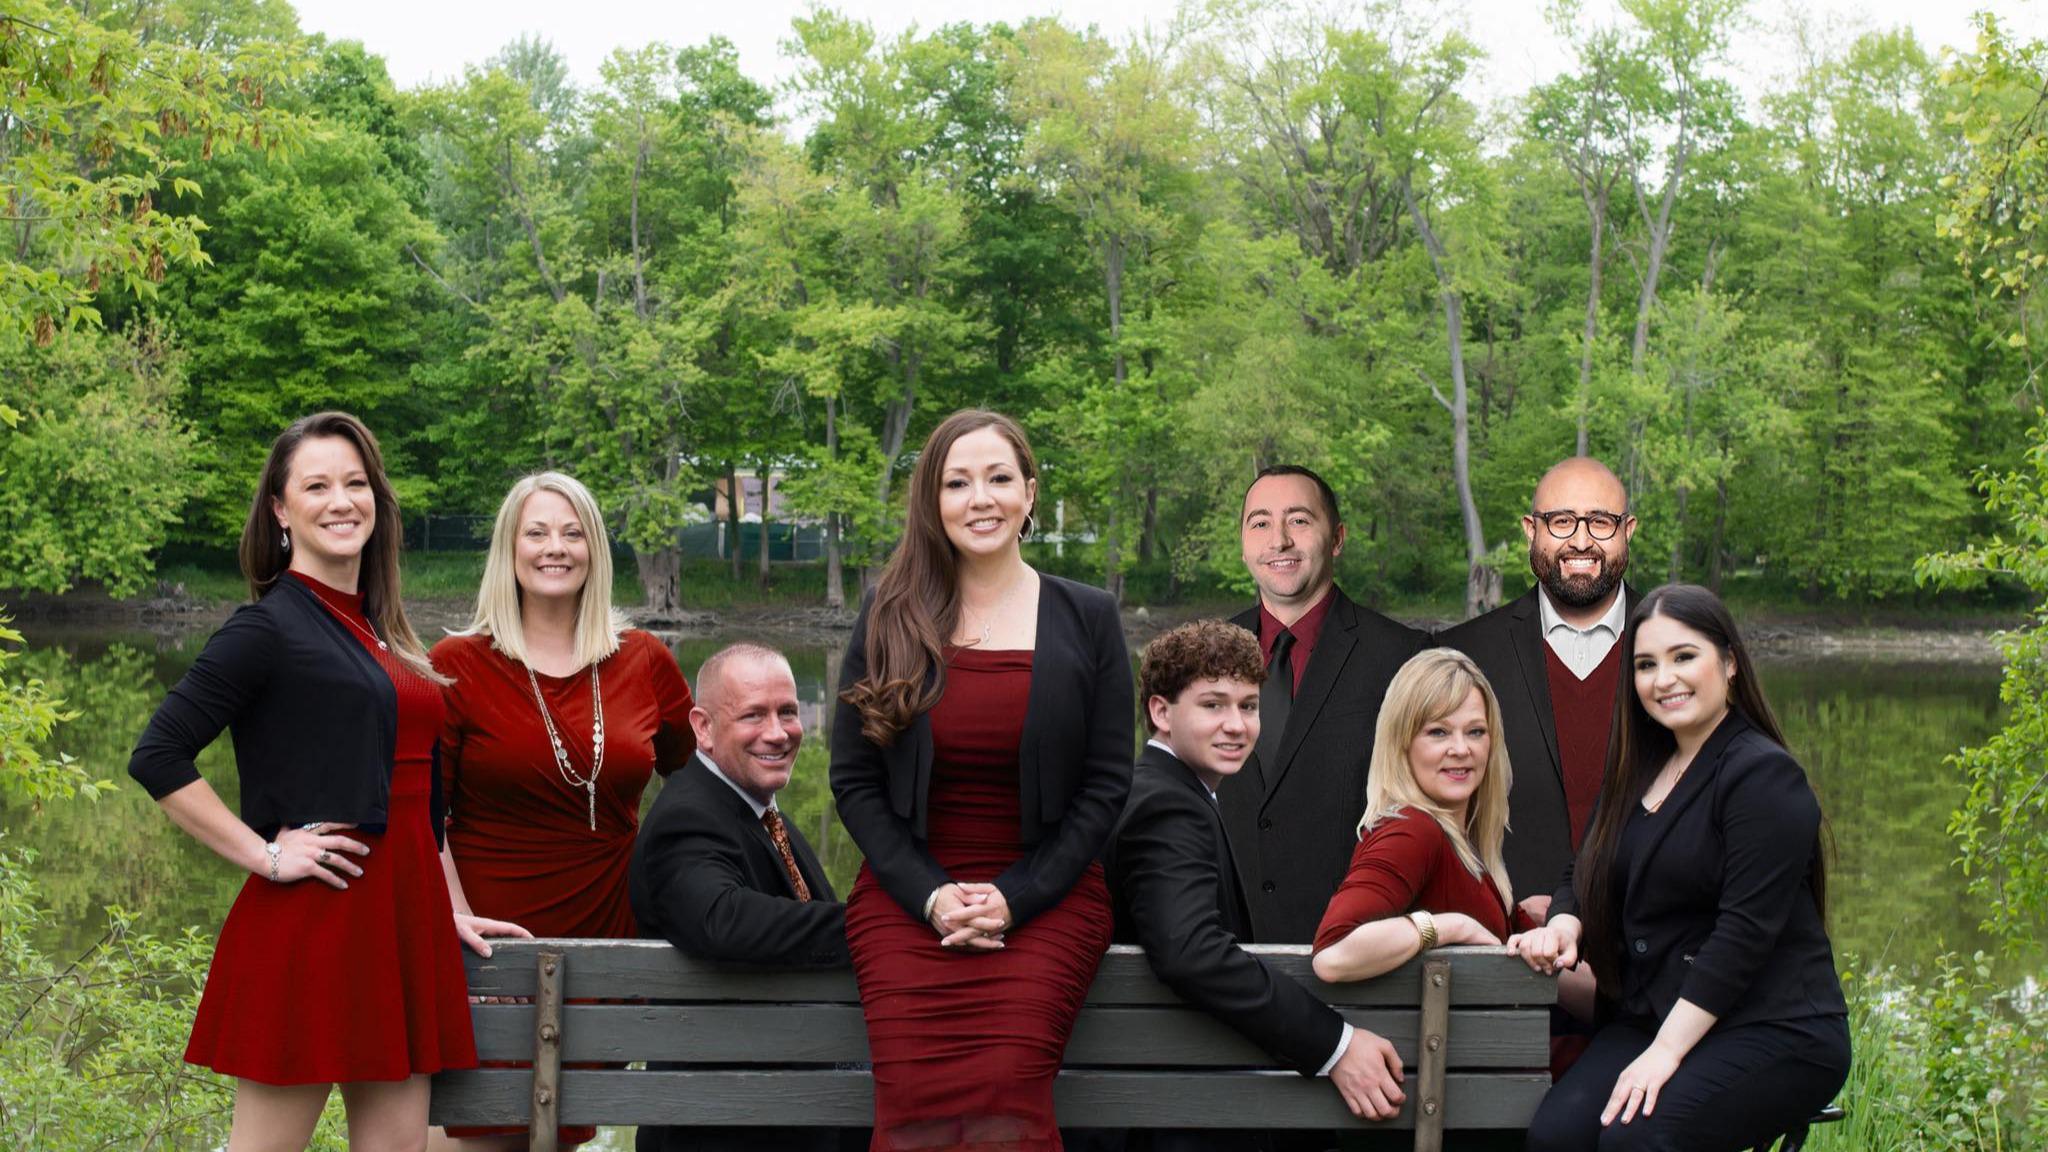 We are a full-service professional real estate group. We Make it Simple Because We Care. The Giovanna Group-Keller Williams Infinity 105 E Spring St, Yorkville, IL, United States, Illinois (630) 333-2798